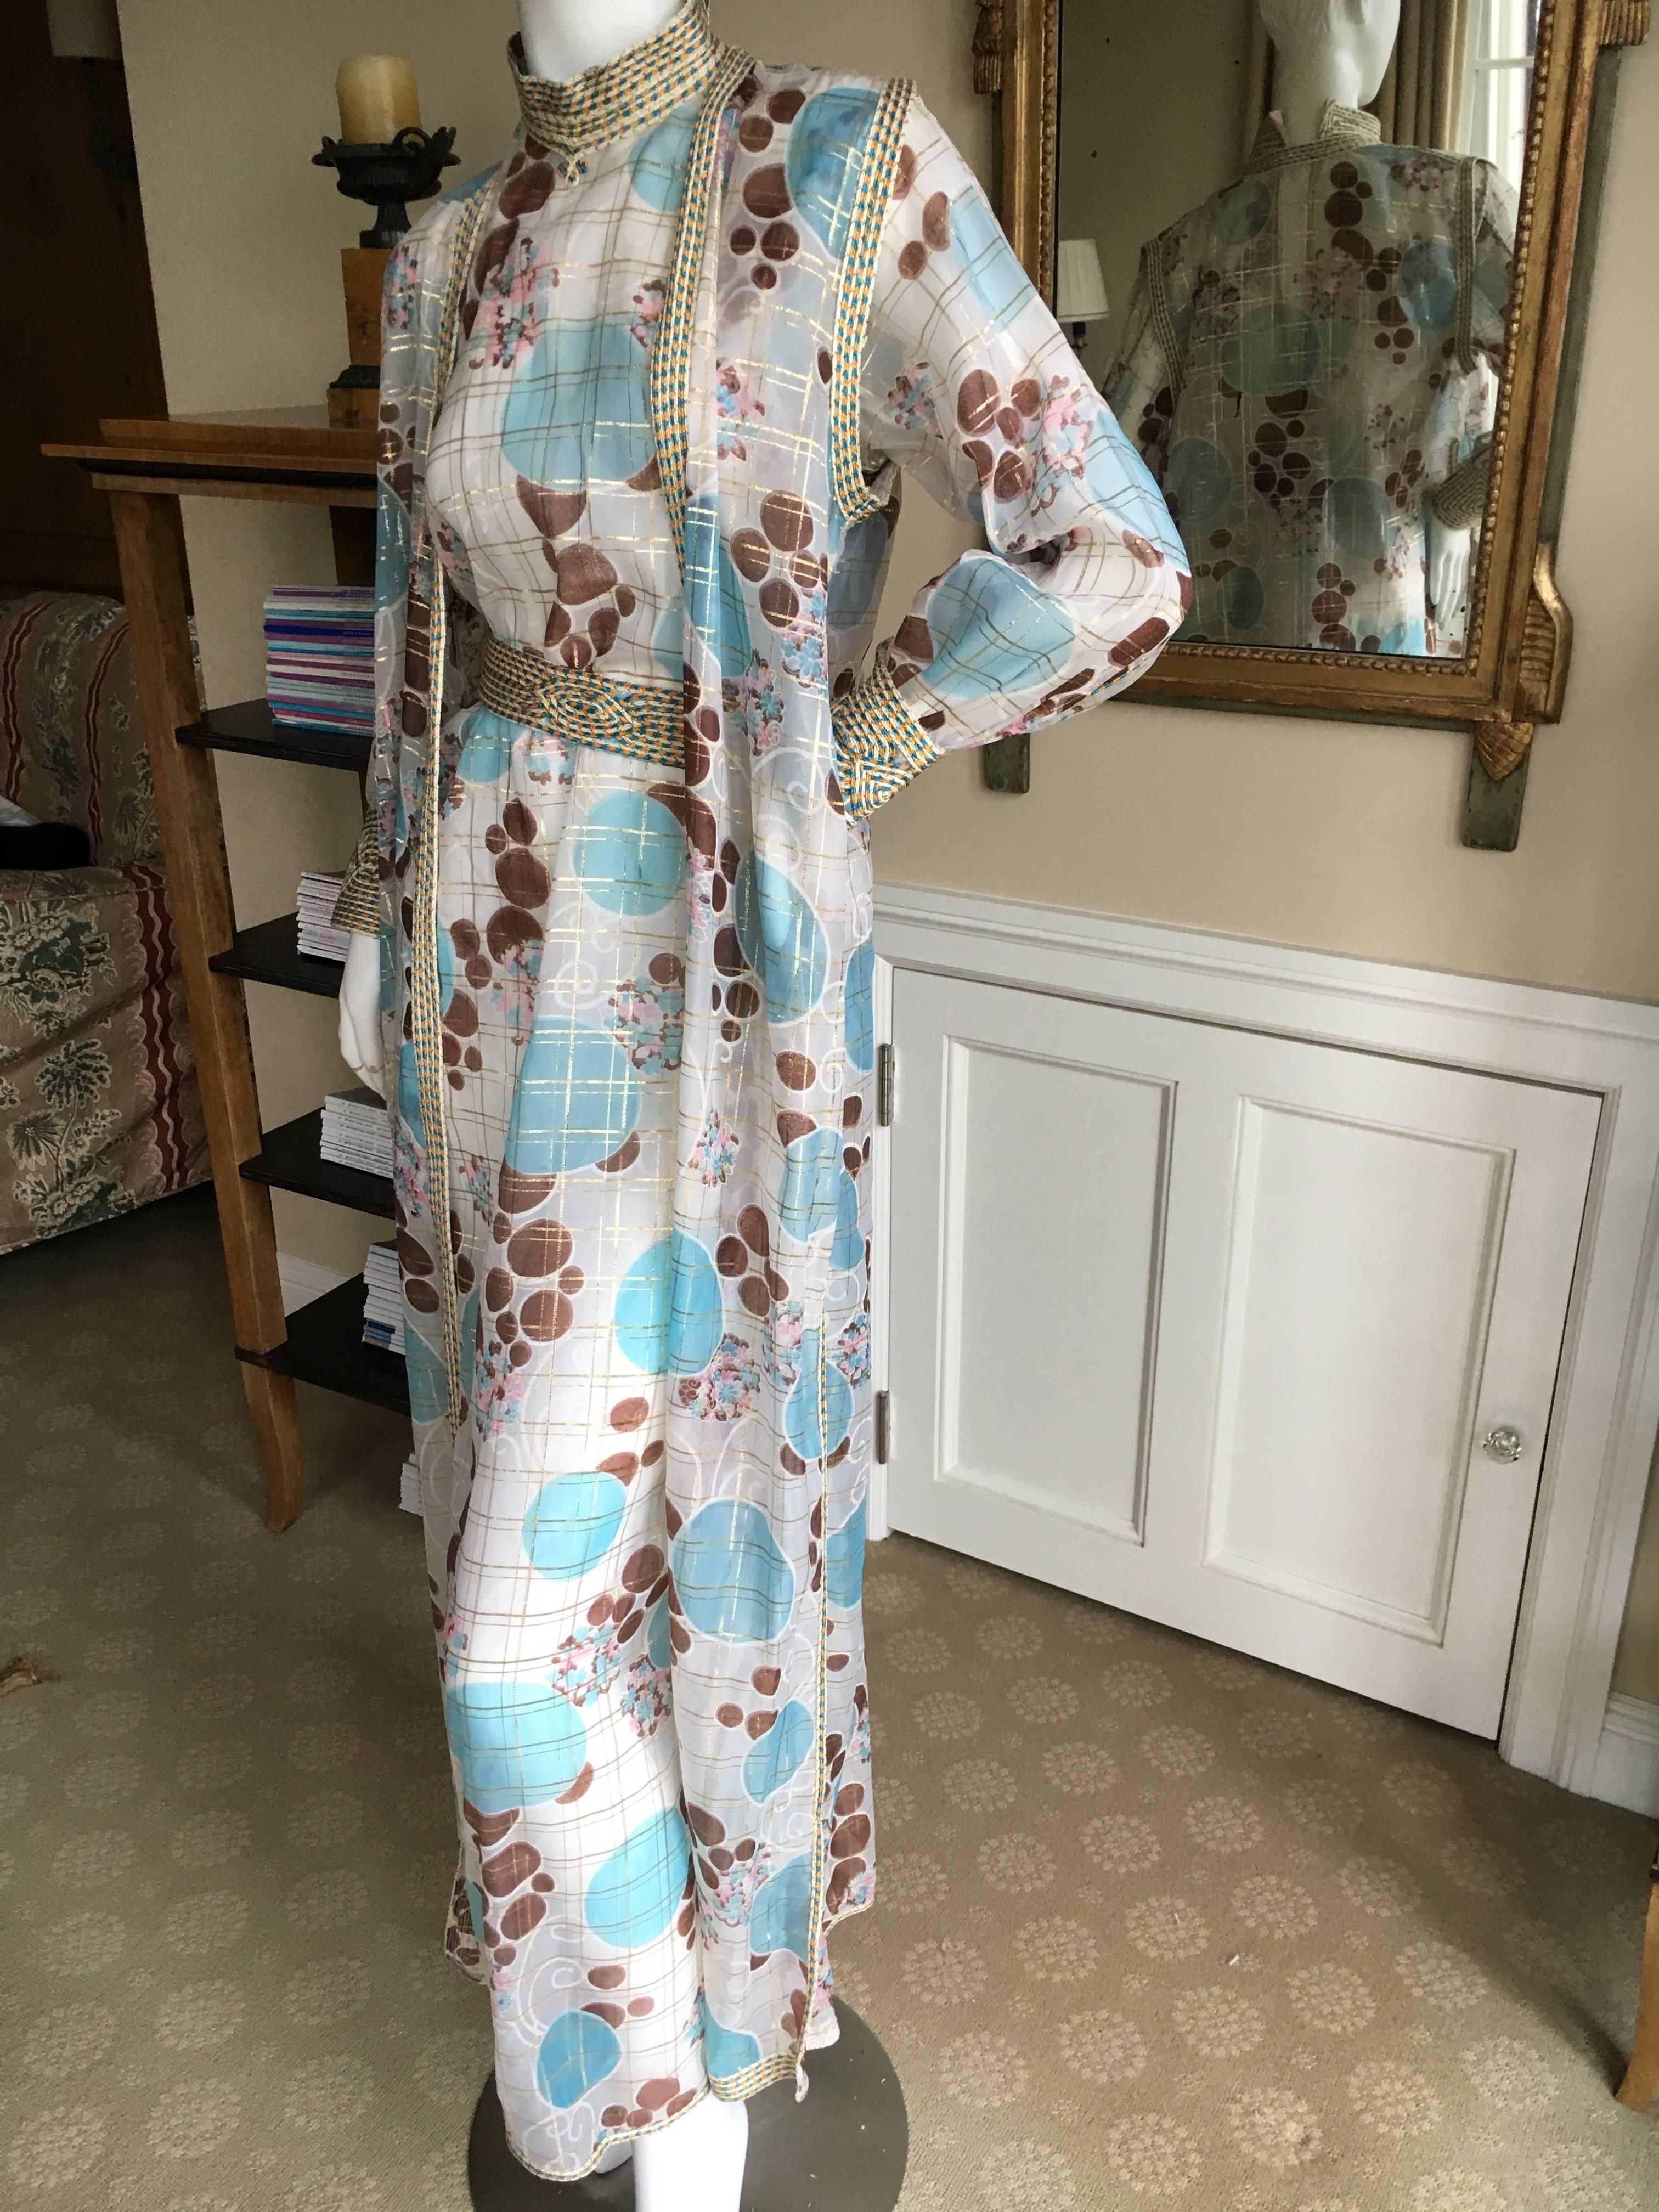 Wonderful sheer three piece evening dress / caftan from Adolfo circa 1977.
There is a dress, sleeveless vest and matching belt.
Bust 38"
Waist 42"
Hips 44"
Length 57"
Excellent condition